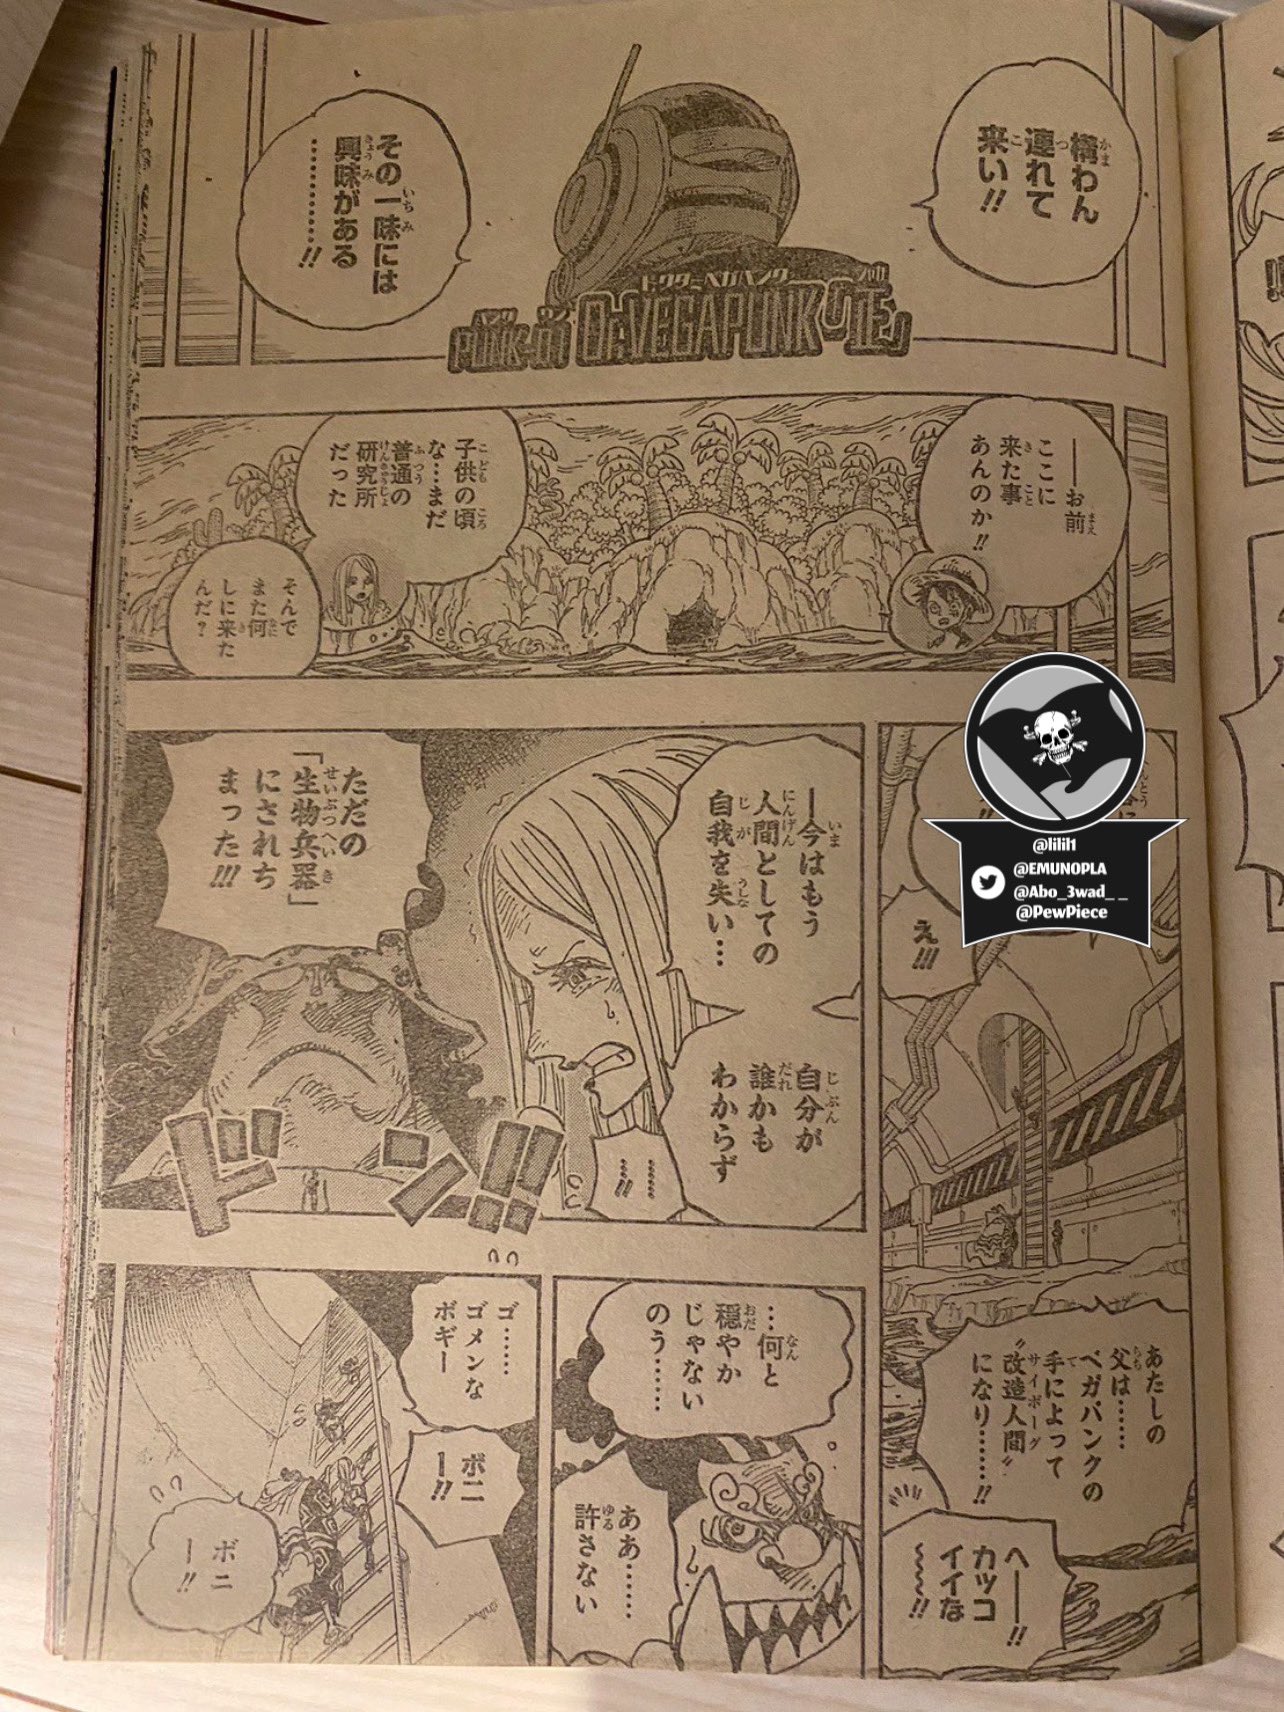 Spoiler - One Piece Chapter 1062 Spoilers Discussion, Page 102